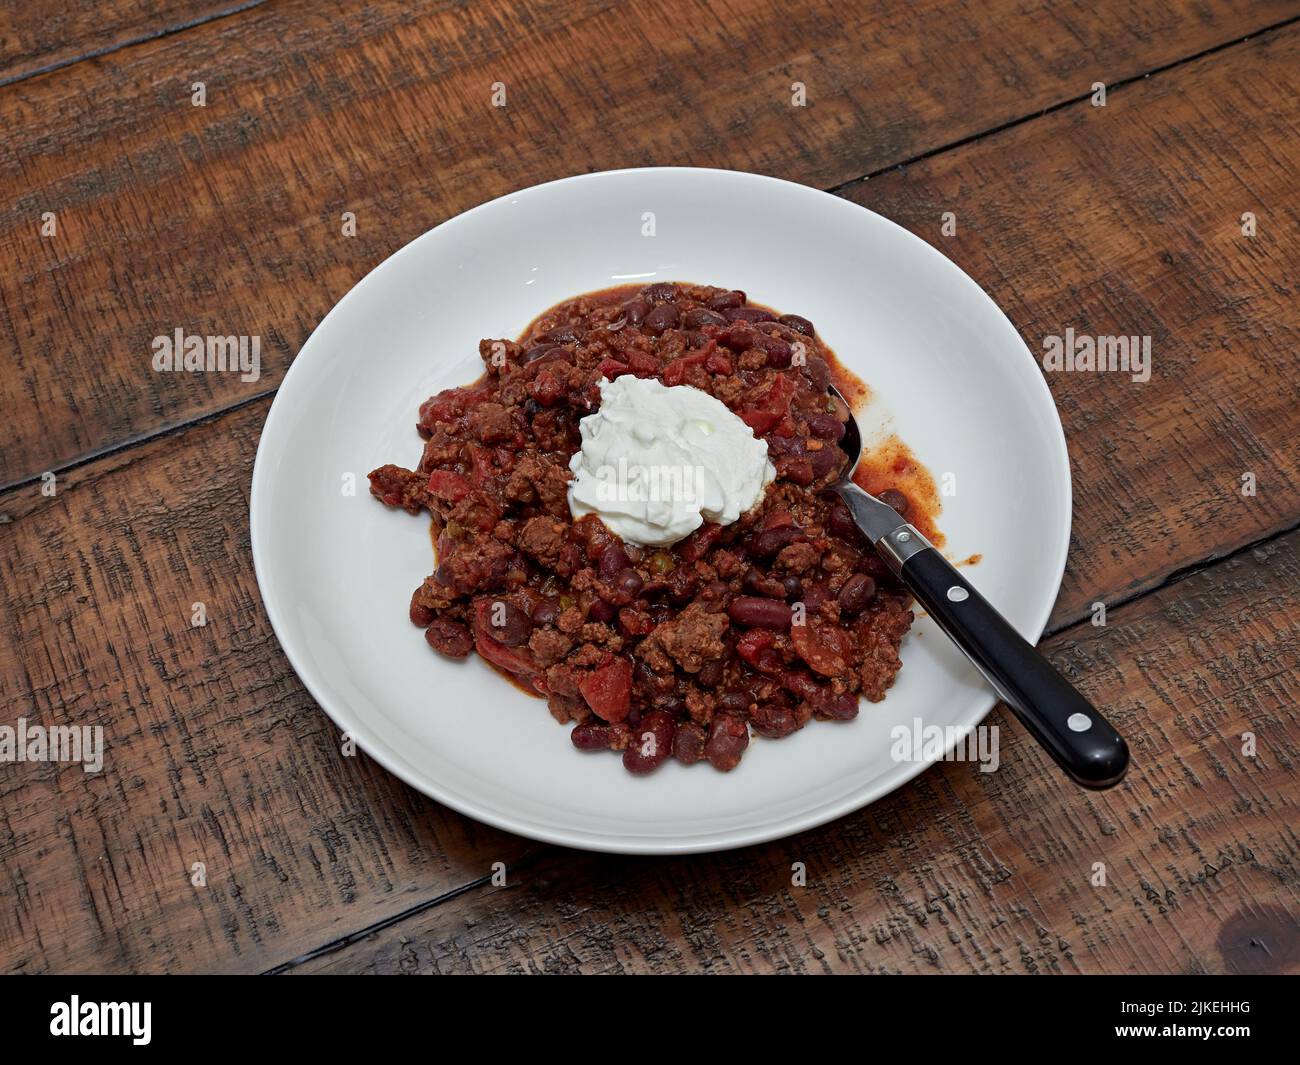 Bowl of homemade chili with a dollop of sour cream and a large spoon for dinner or lunch. Stock Photo